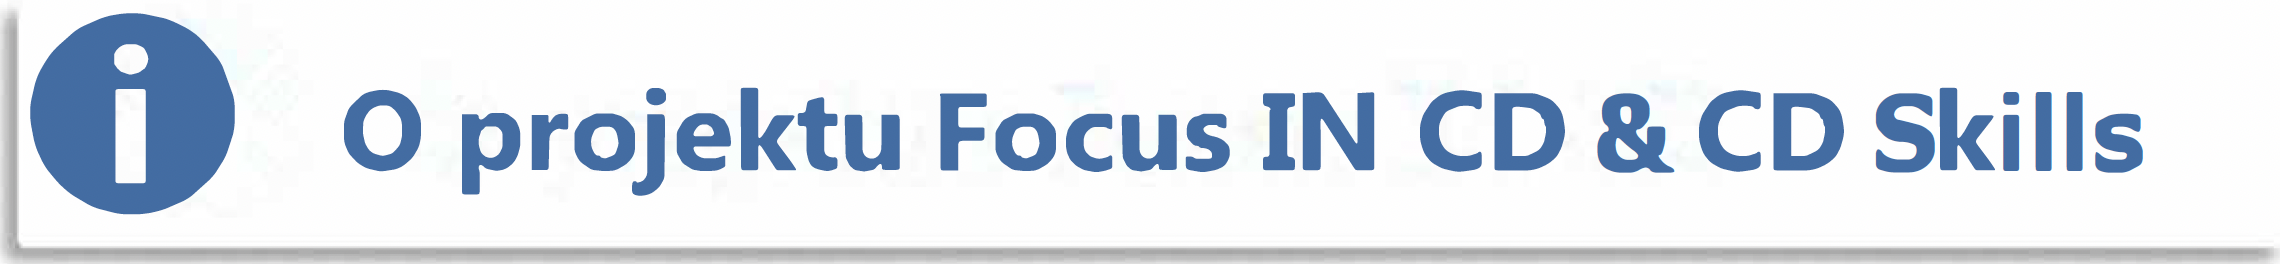 About Focus IN CD